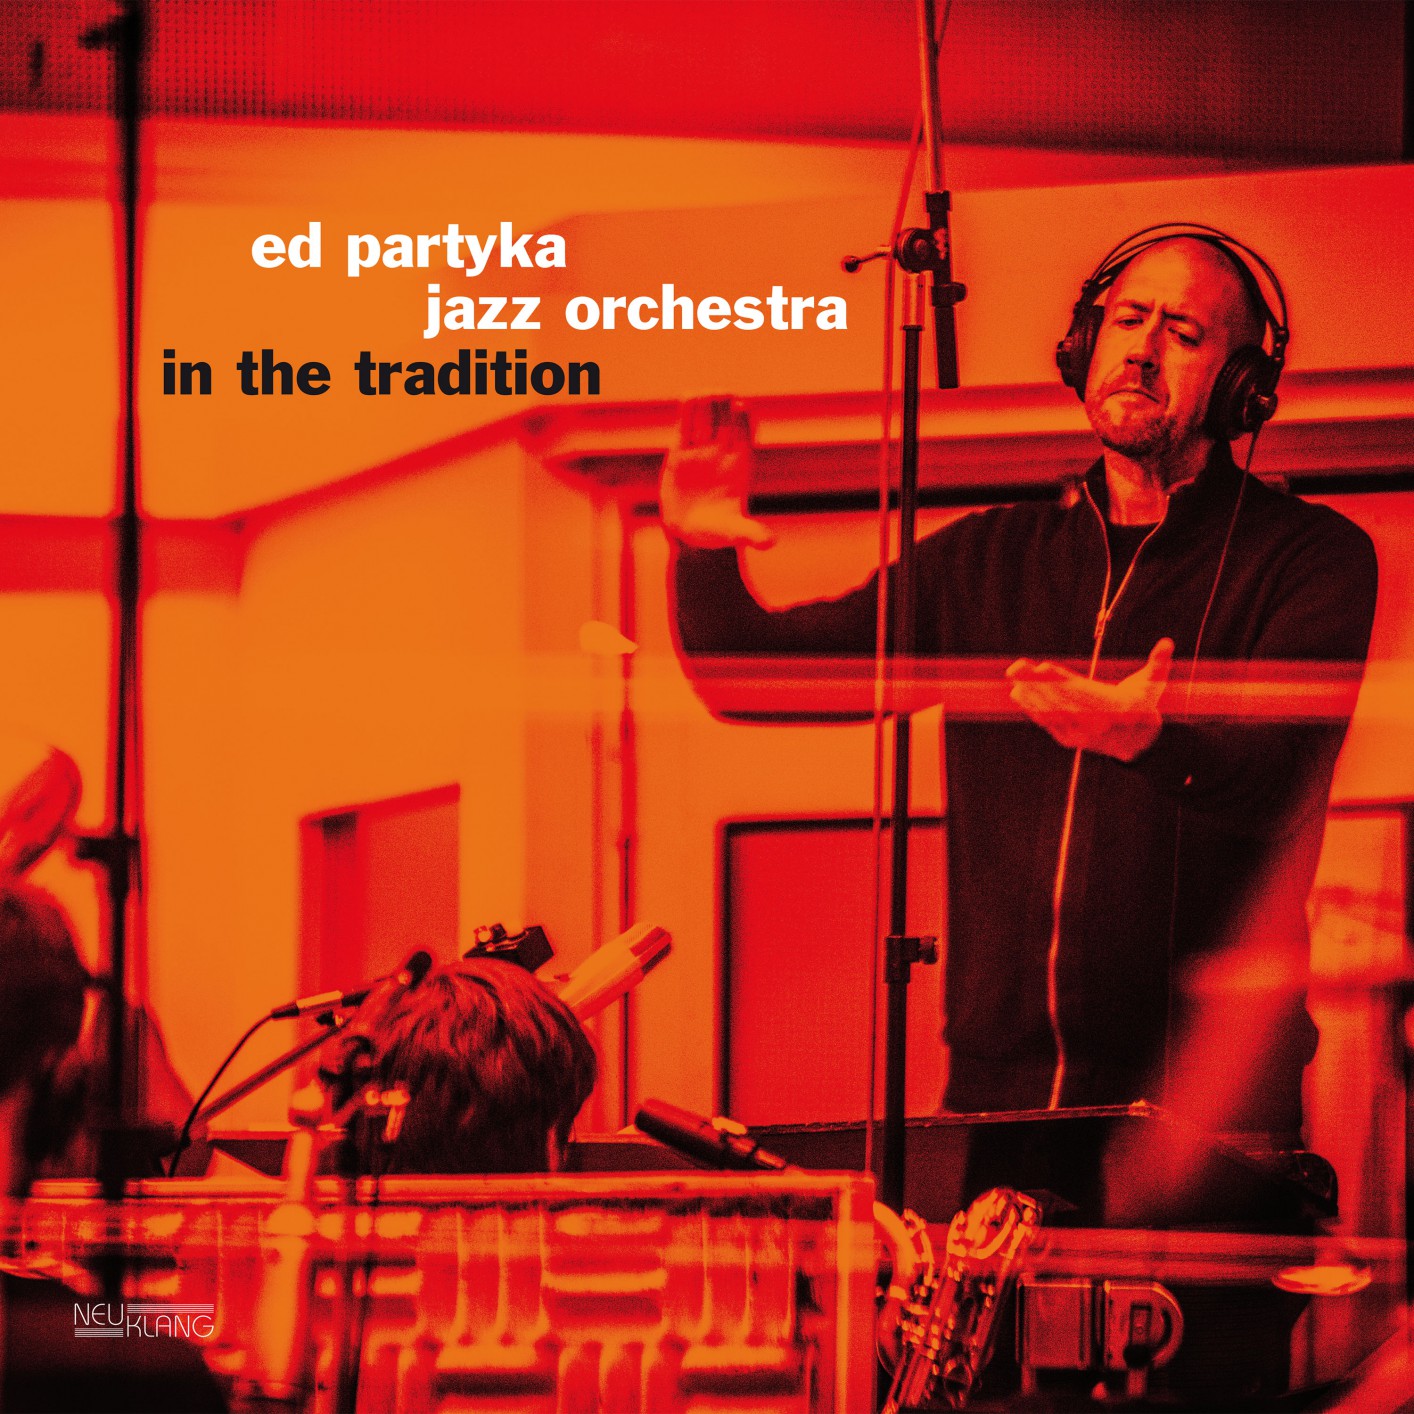 Ed Partyka Jazz Orchestra – In the Tradition (2018) [FLAC 24bit/48kHz]